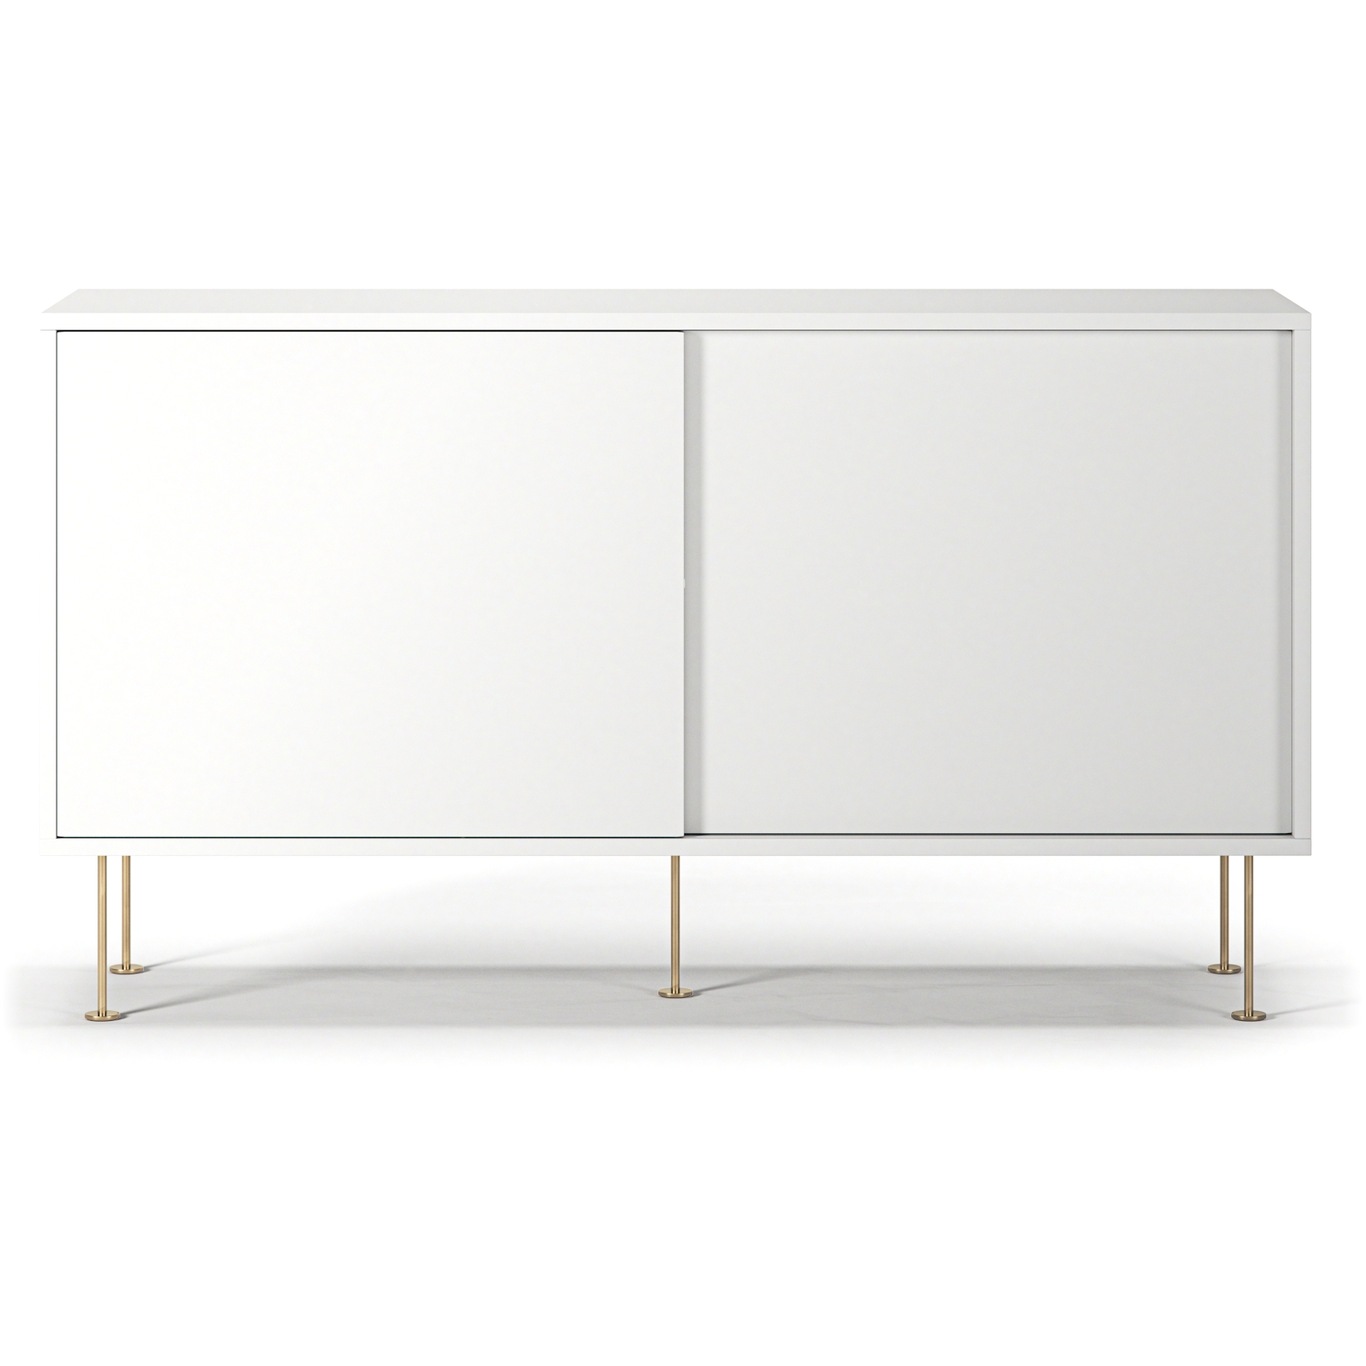 Vogue Side Table With Legs 136 cm, White / Brass